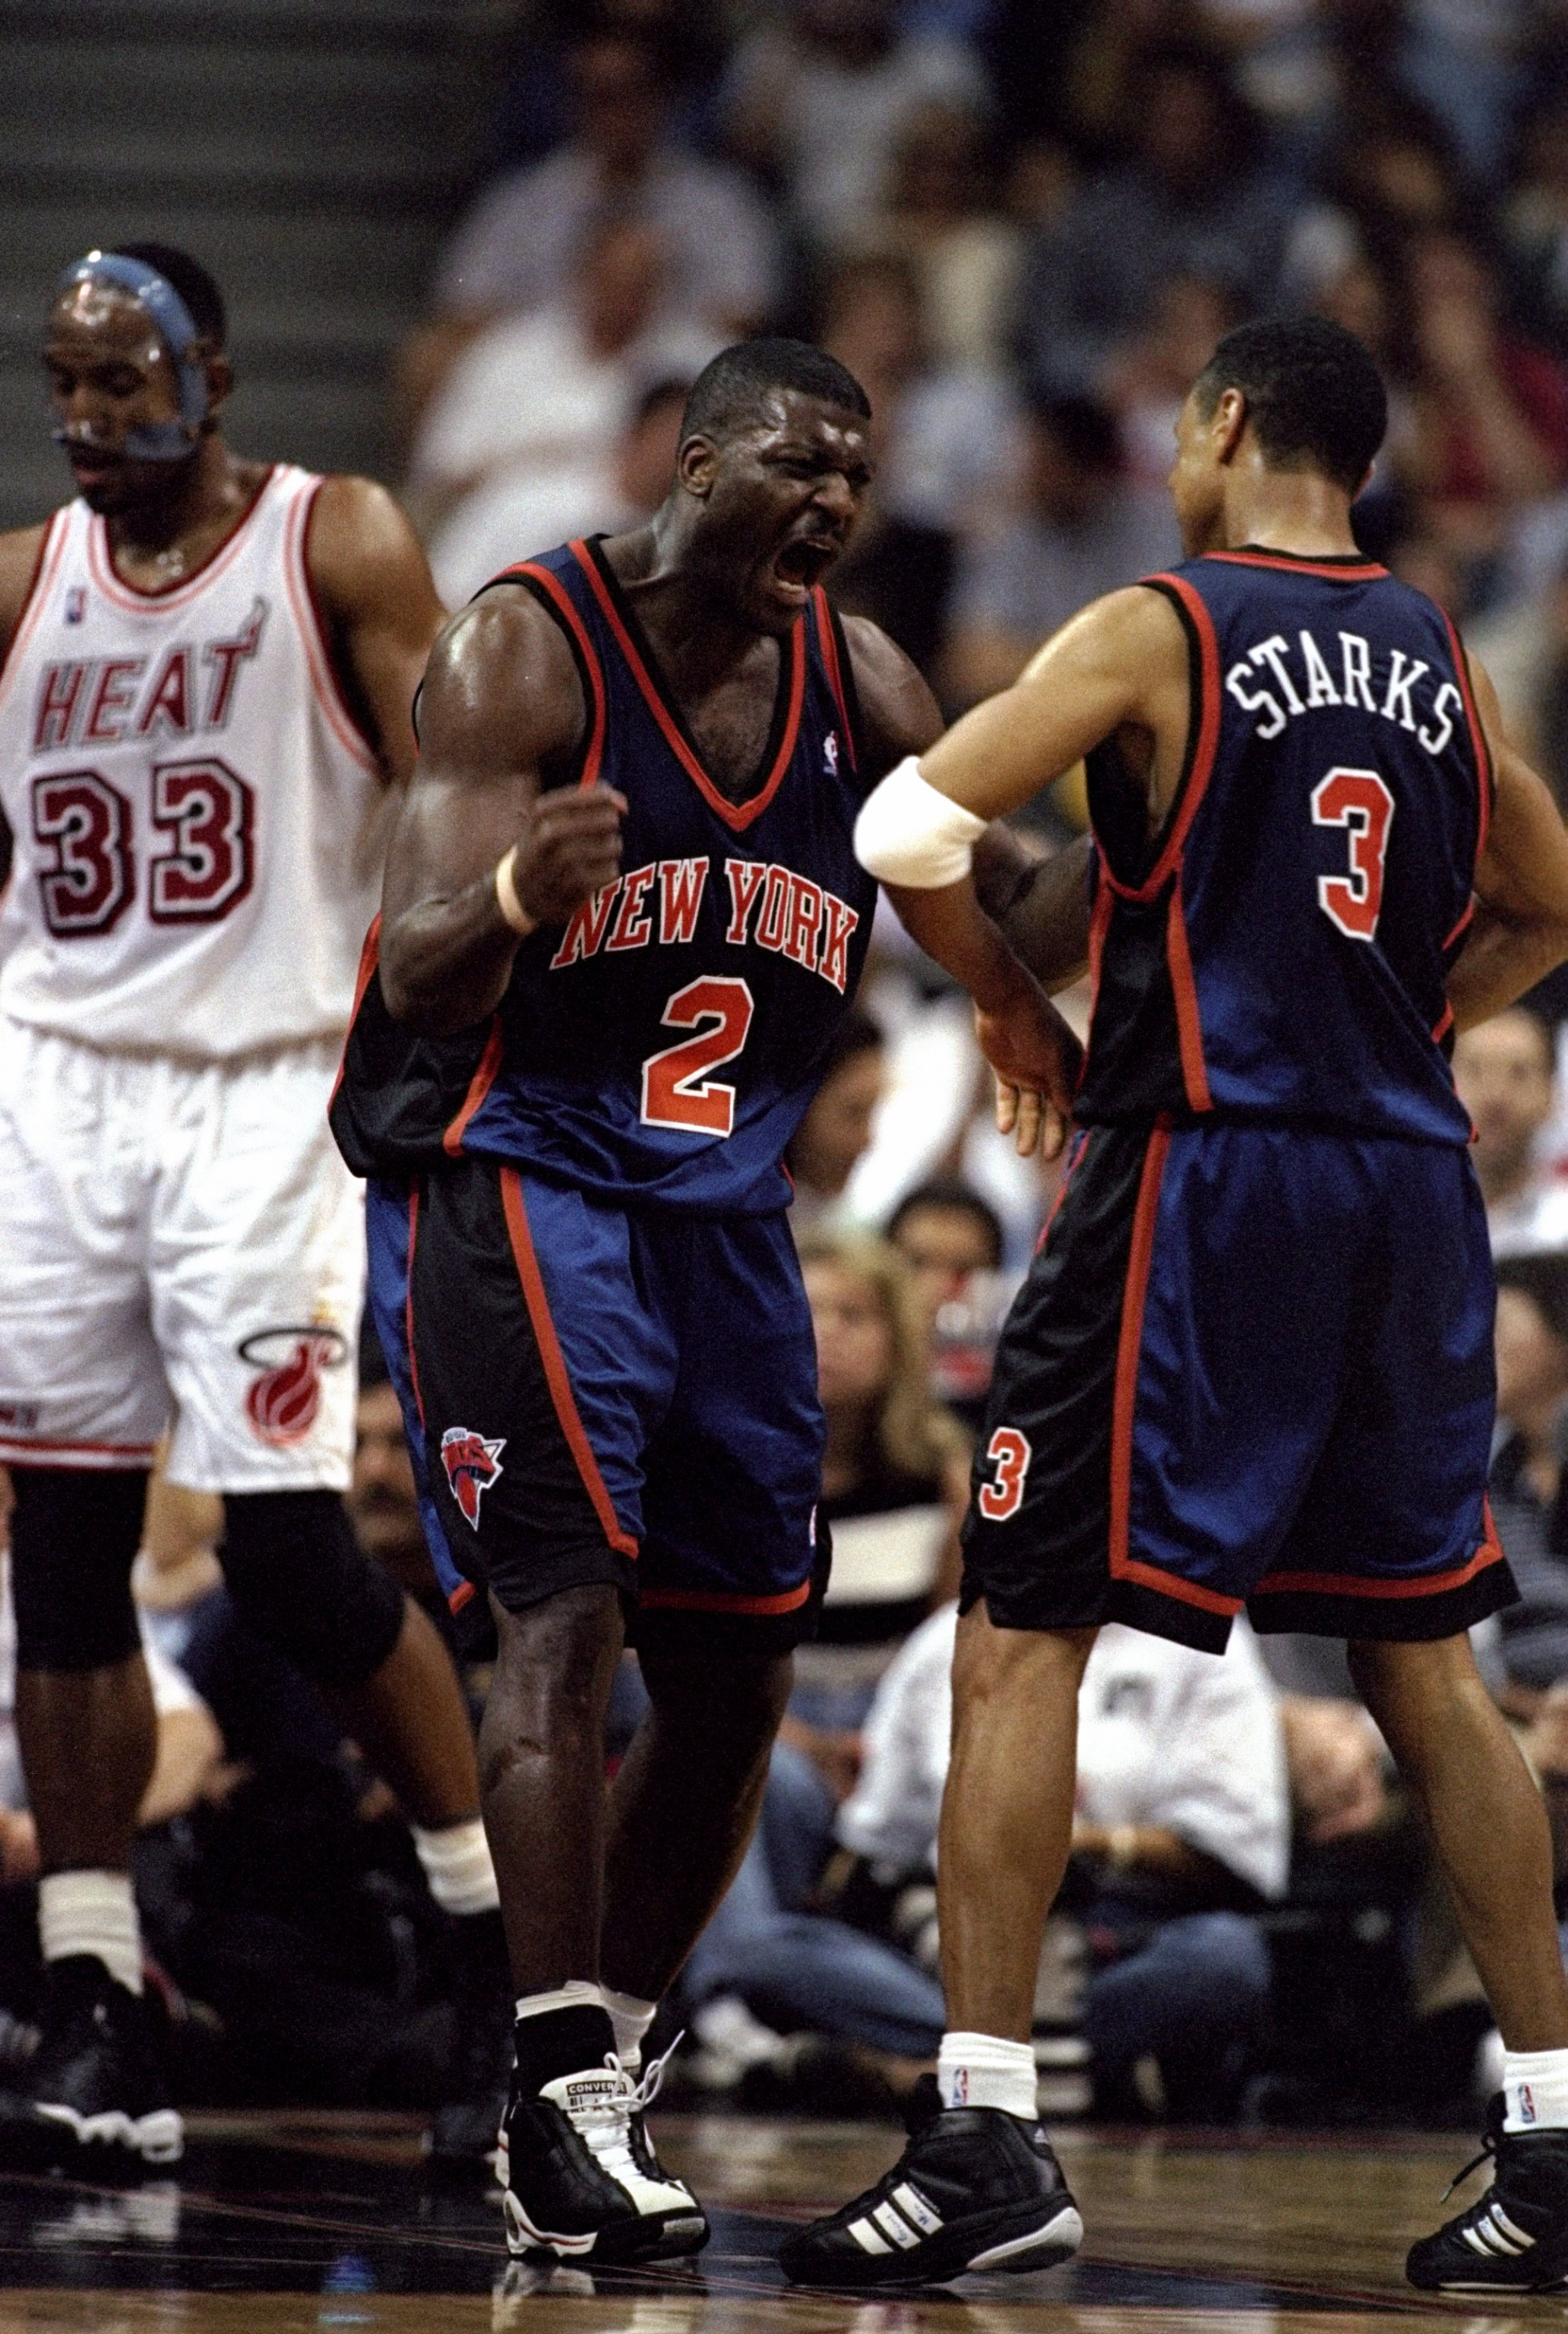 26 Apr 1998: Forward Larry Johnson and guard John Starks of the New York Knicks in action against the Miami Heat during an NBA playoff game at the Miami Arena in Miami, Florida. The Knicks defeated the Heat 96-86.